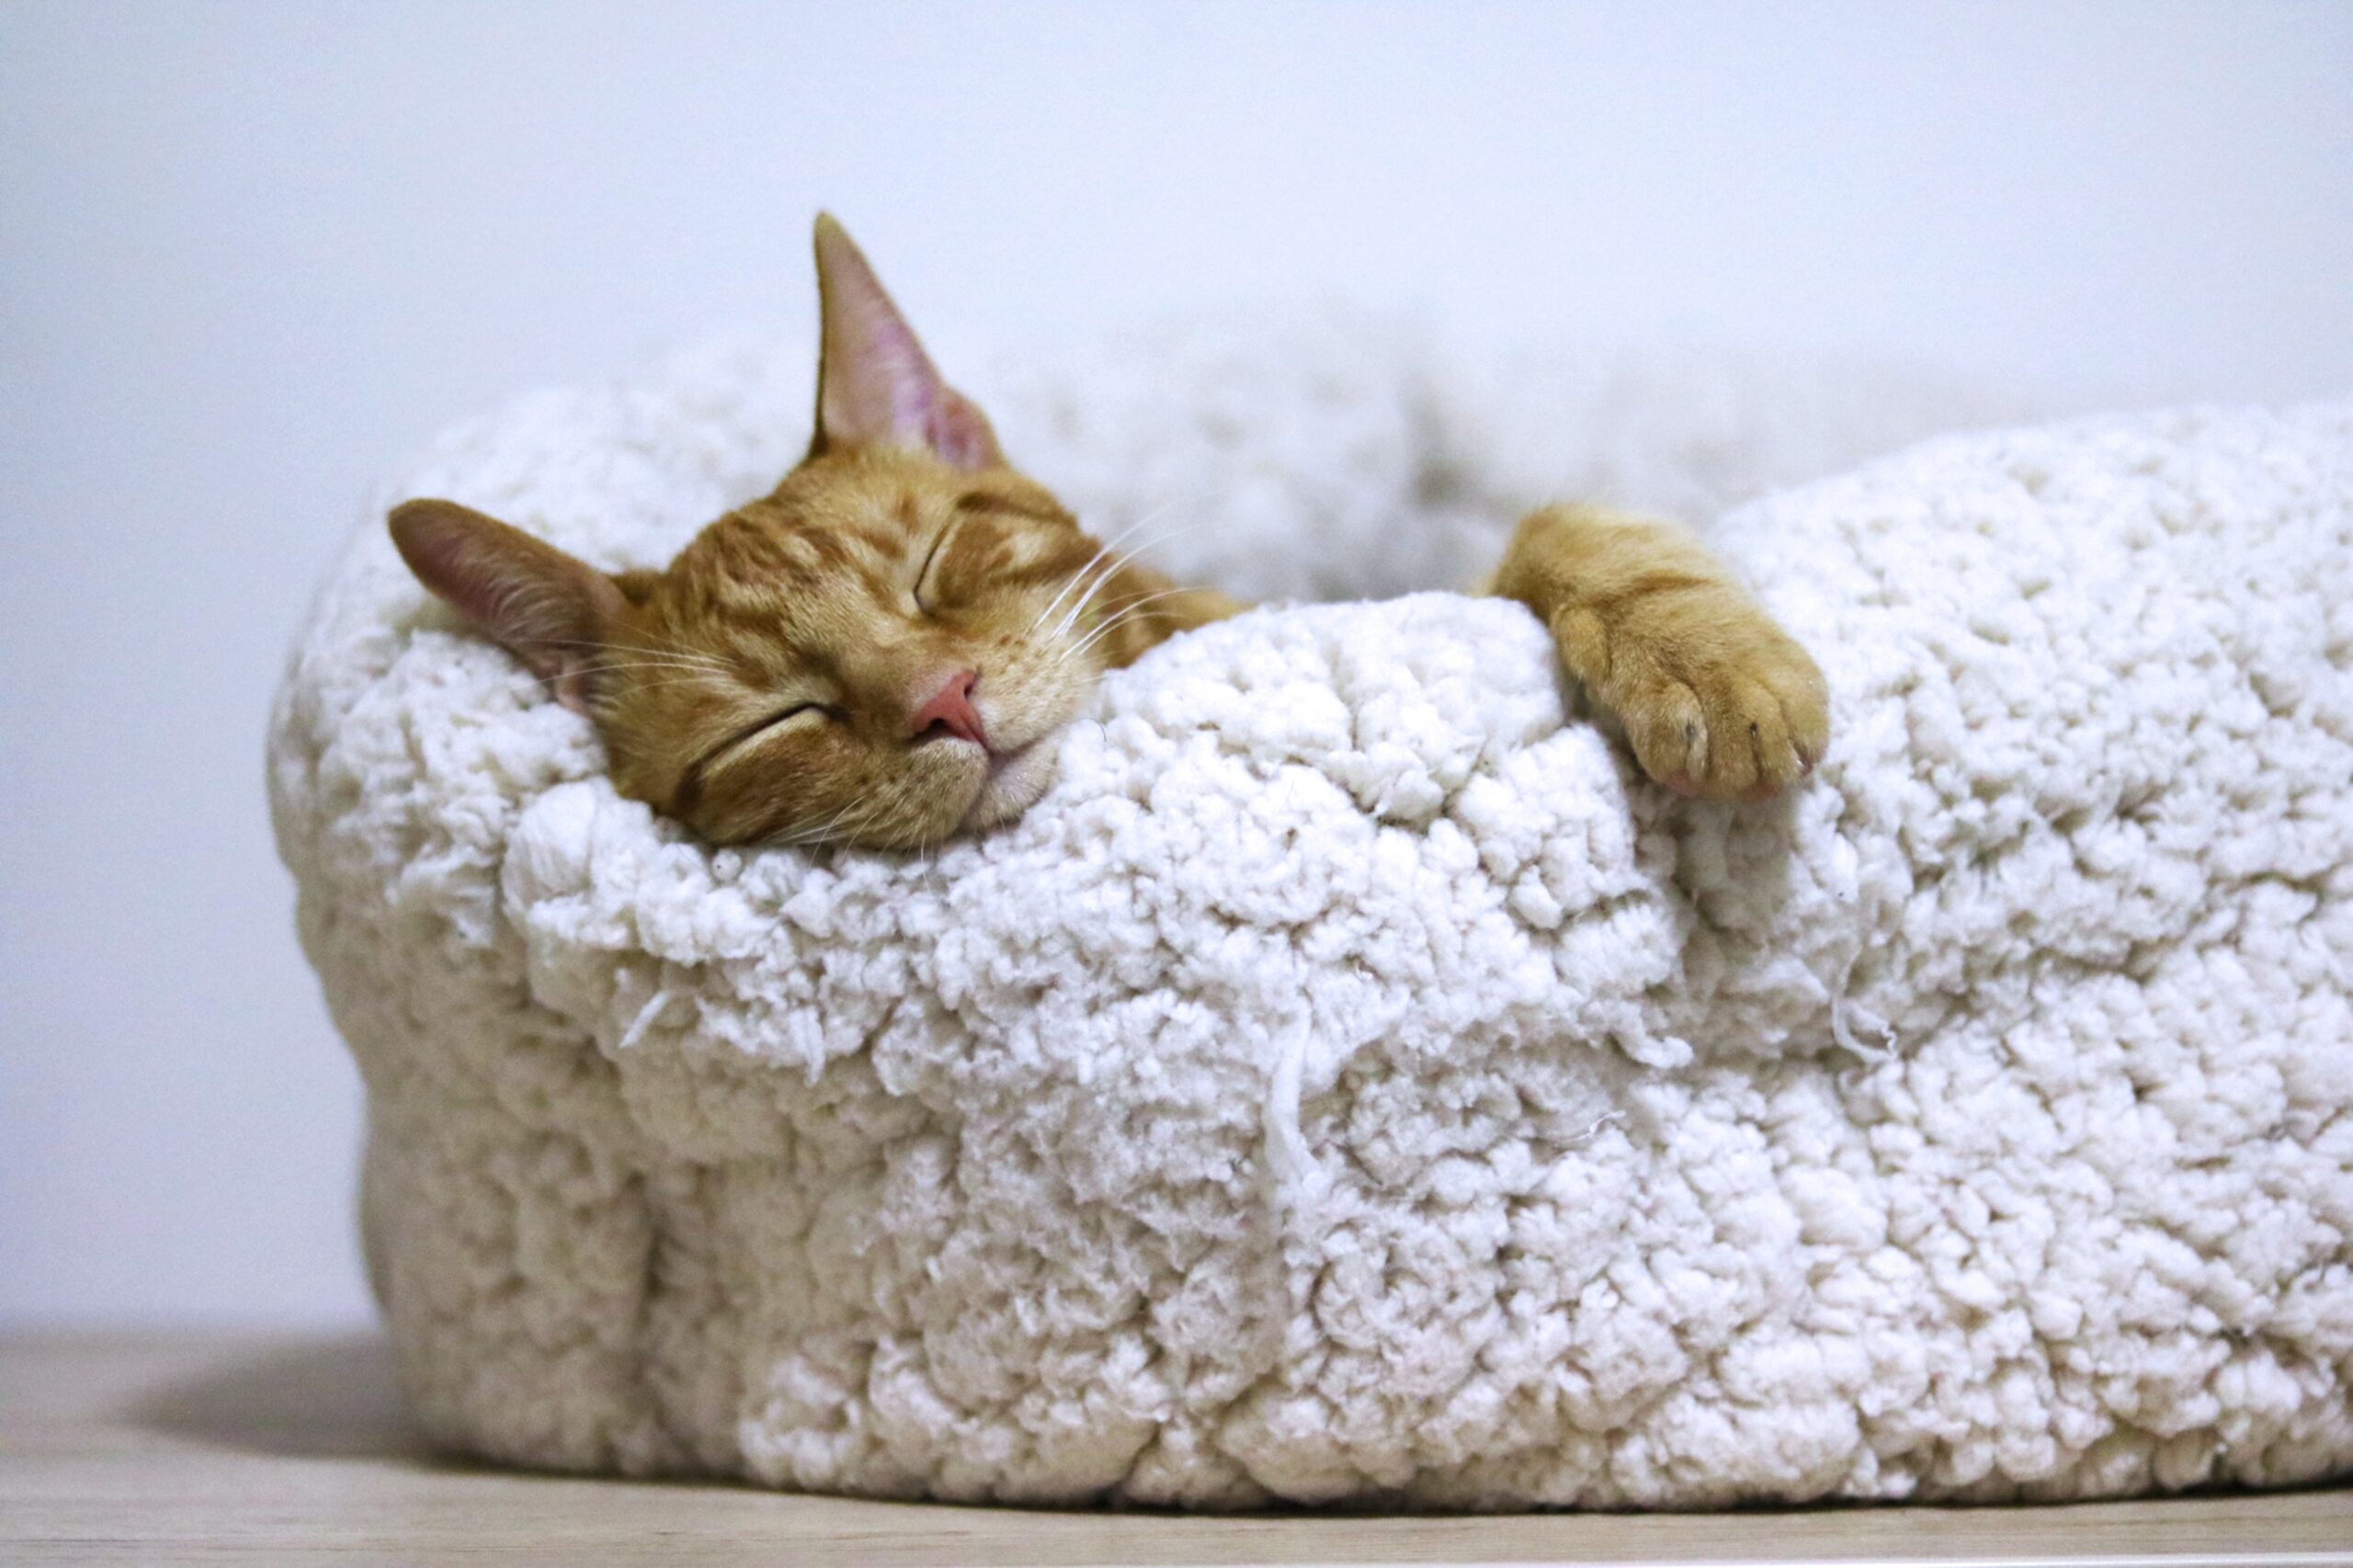 Where cats sleep on bed meaning - Complete Details